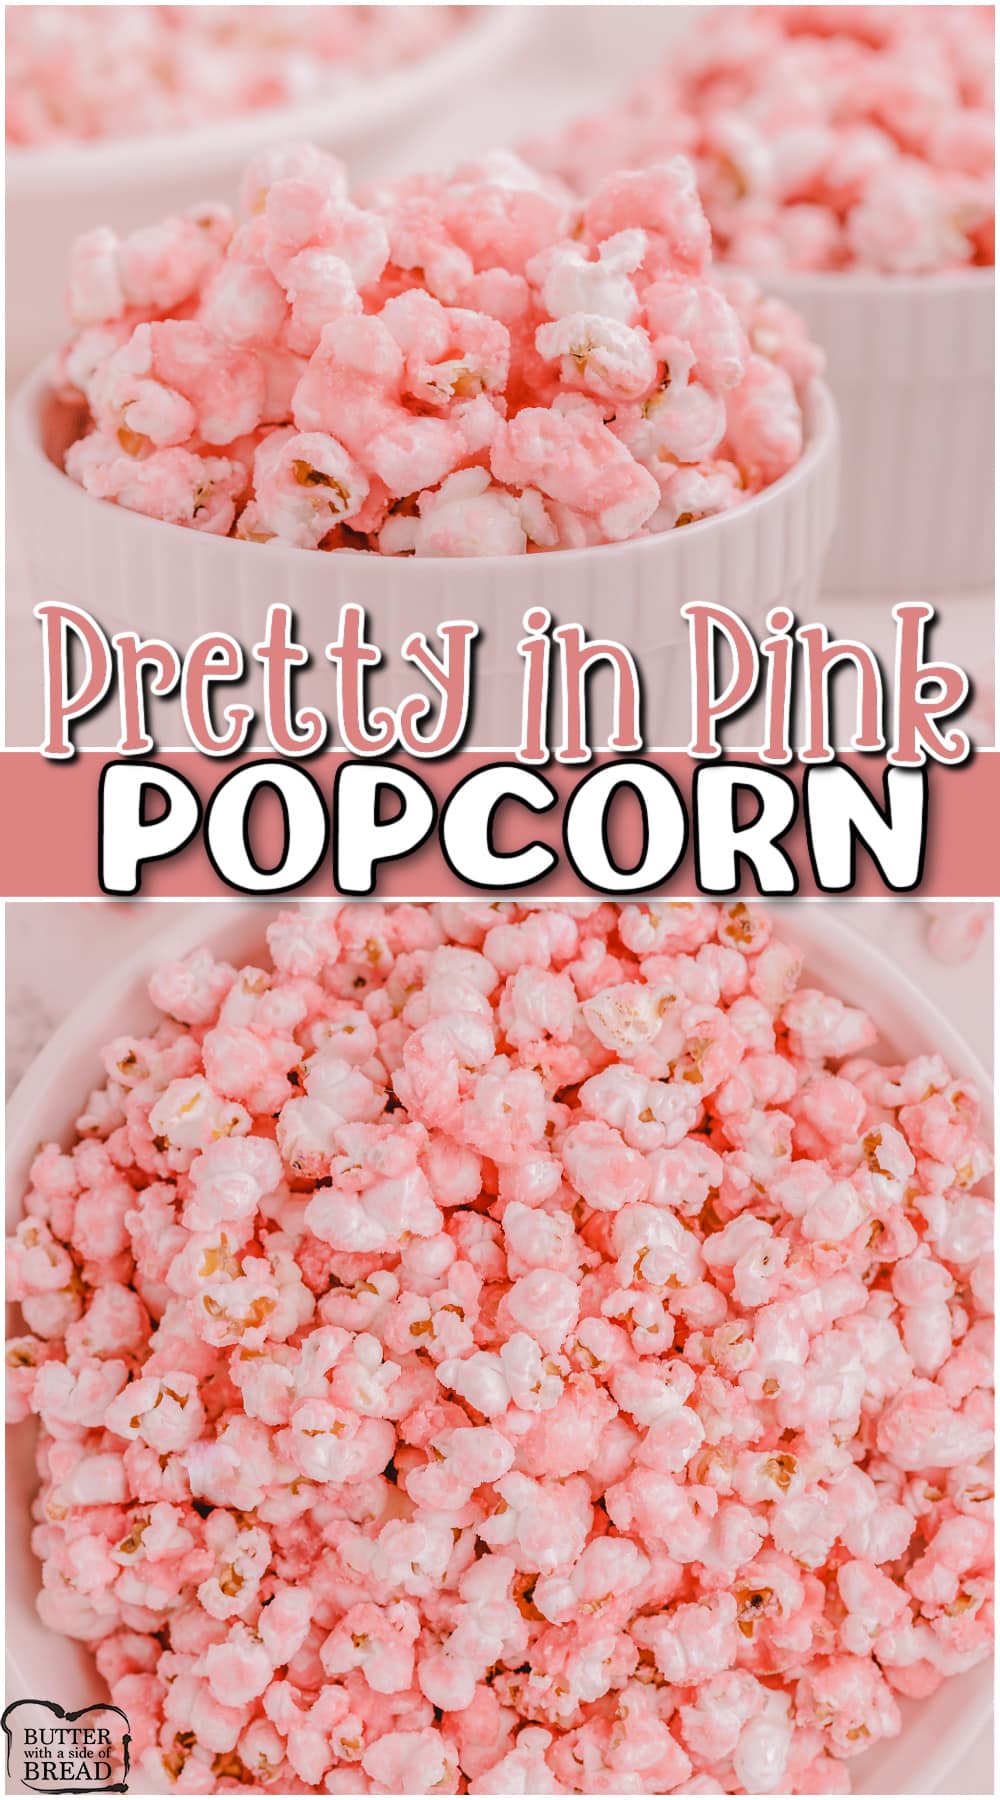 Old-fashioned Pink Popcorn made with whipping cream, sugar & pink coloring for a festive, candy coated treat! Pink popcorn perfect for parties, baby showers or anyone who loves PINK! 